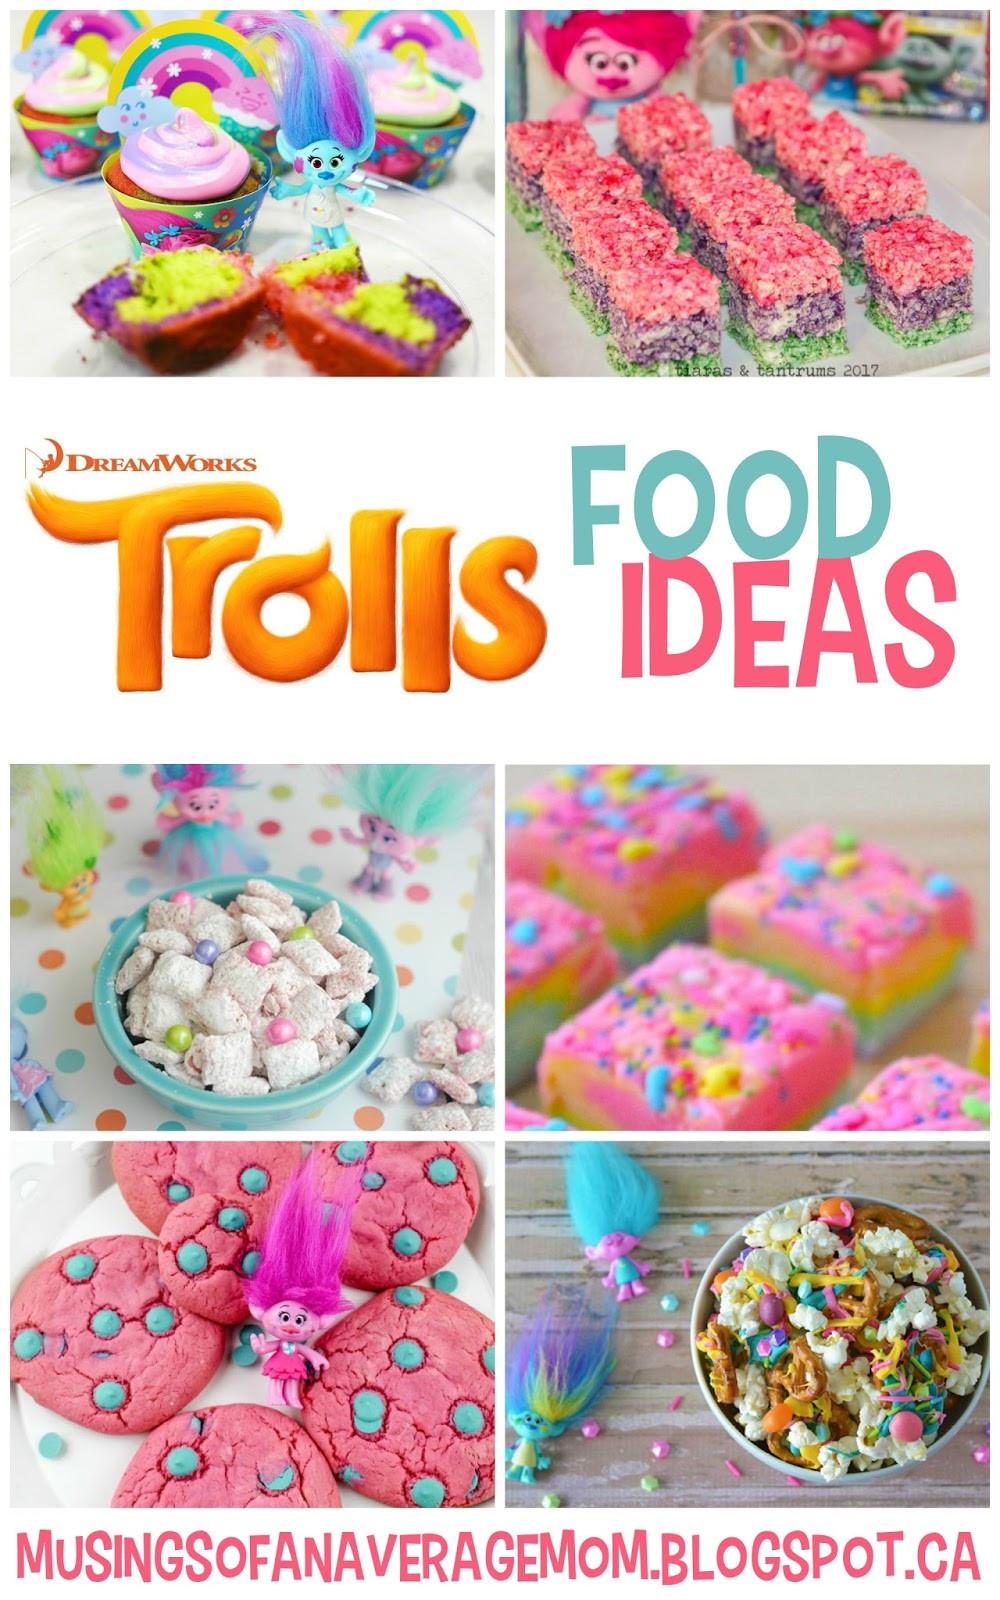 Trolls Birthday Party Ideas For Food
 Musings of an Average Mom Everything You Need for a